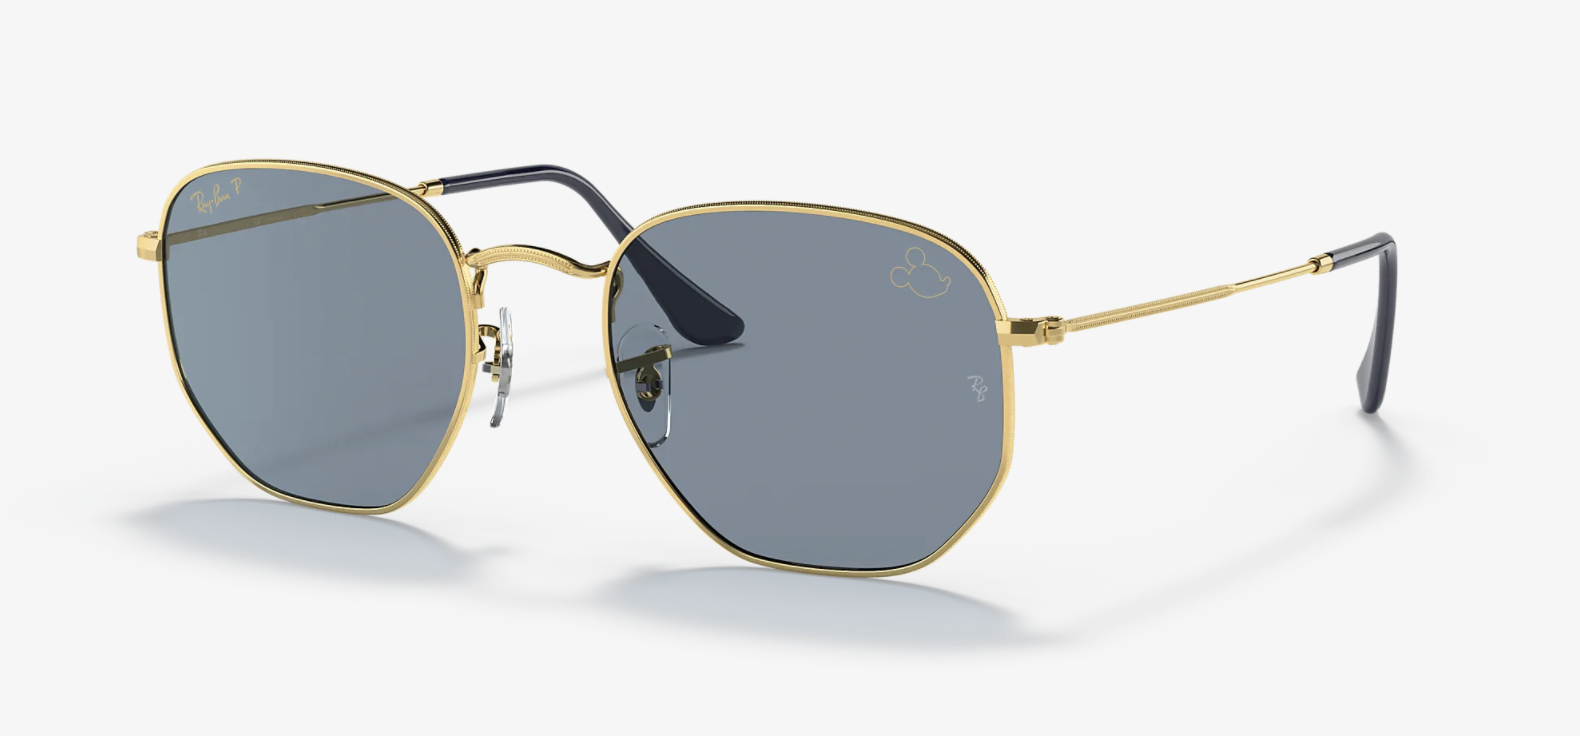 Win FREE Sunglasses from the Ray-Ban x Disney World 50th Anniversary  Collection! - AllEars.Net